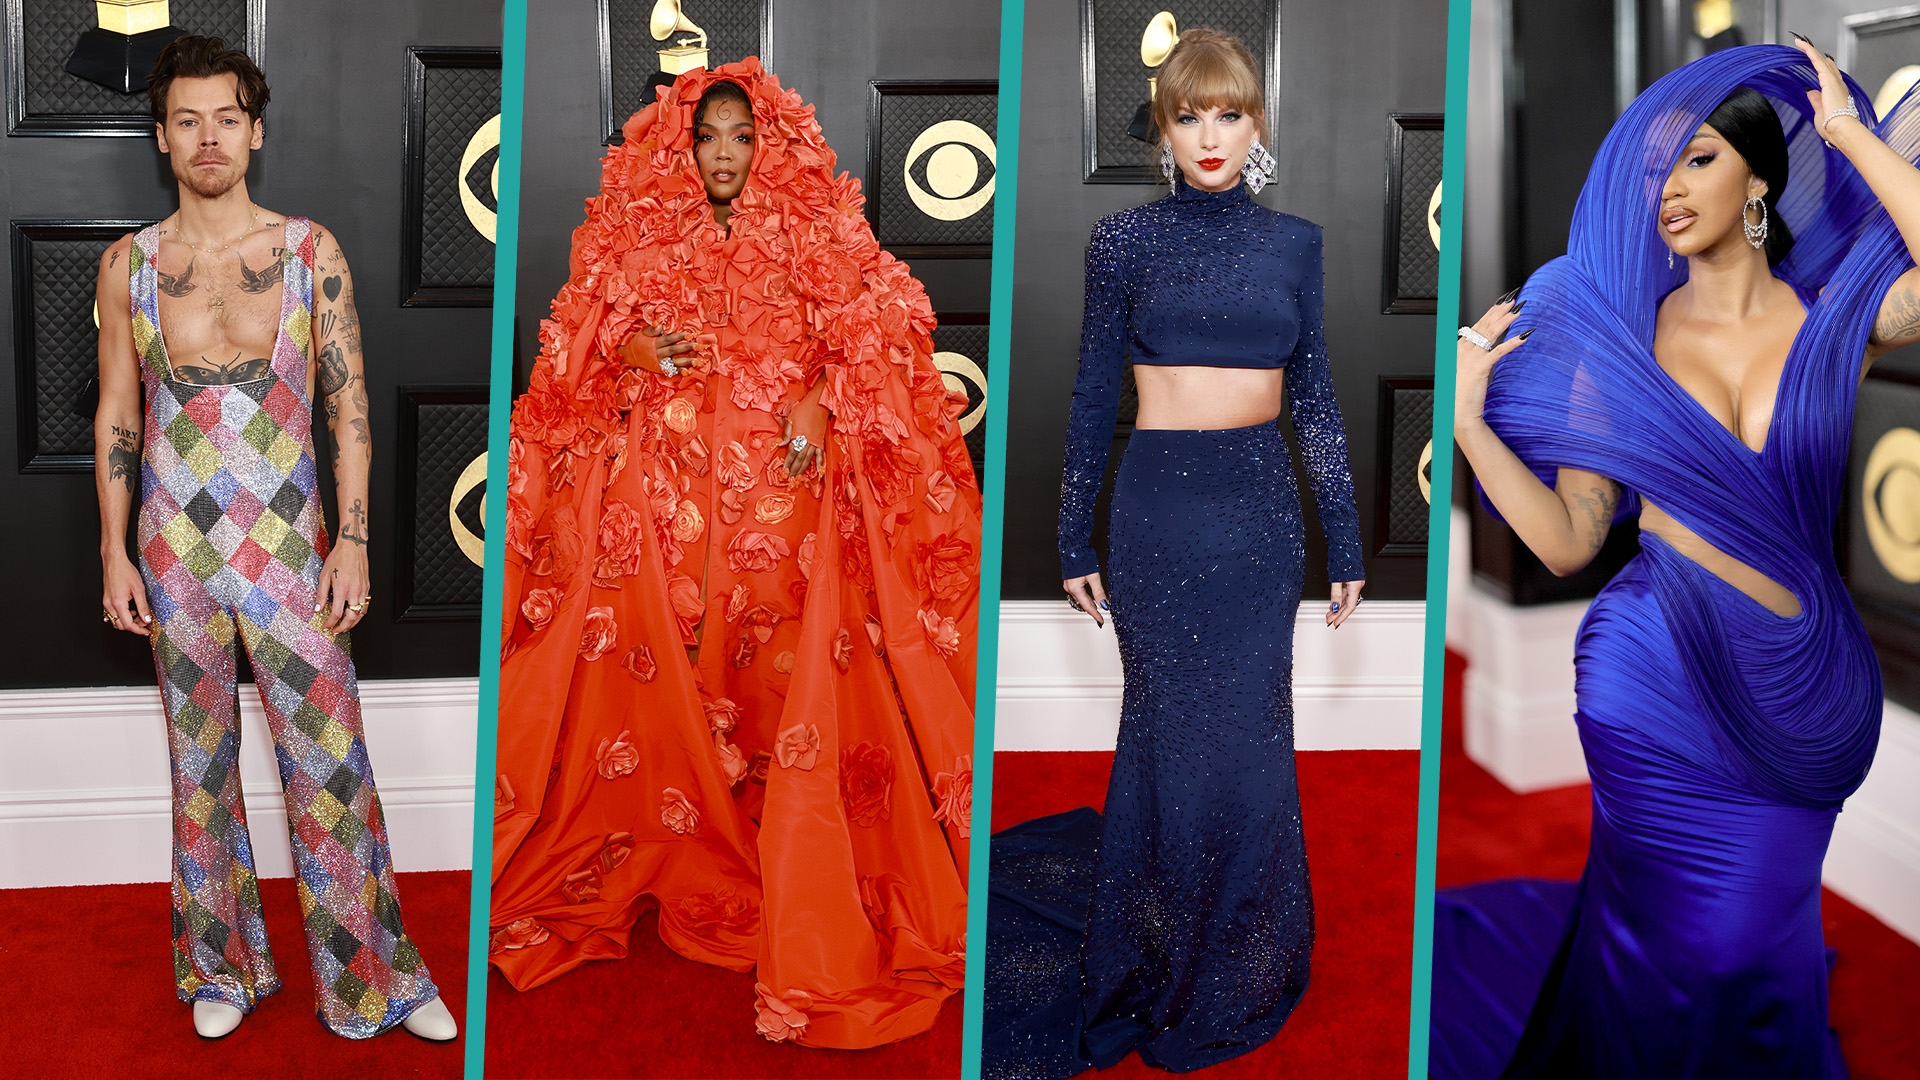 Grammys 2023 Red Carpet: All the Fashion, Outfits, and Looks